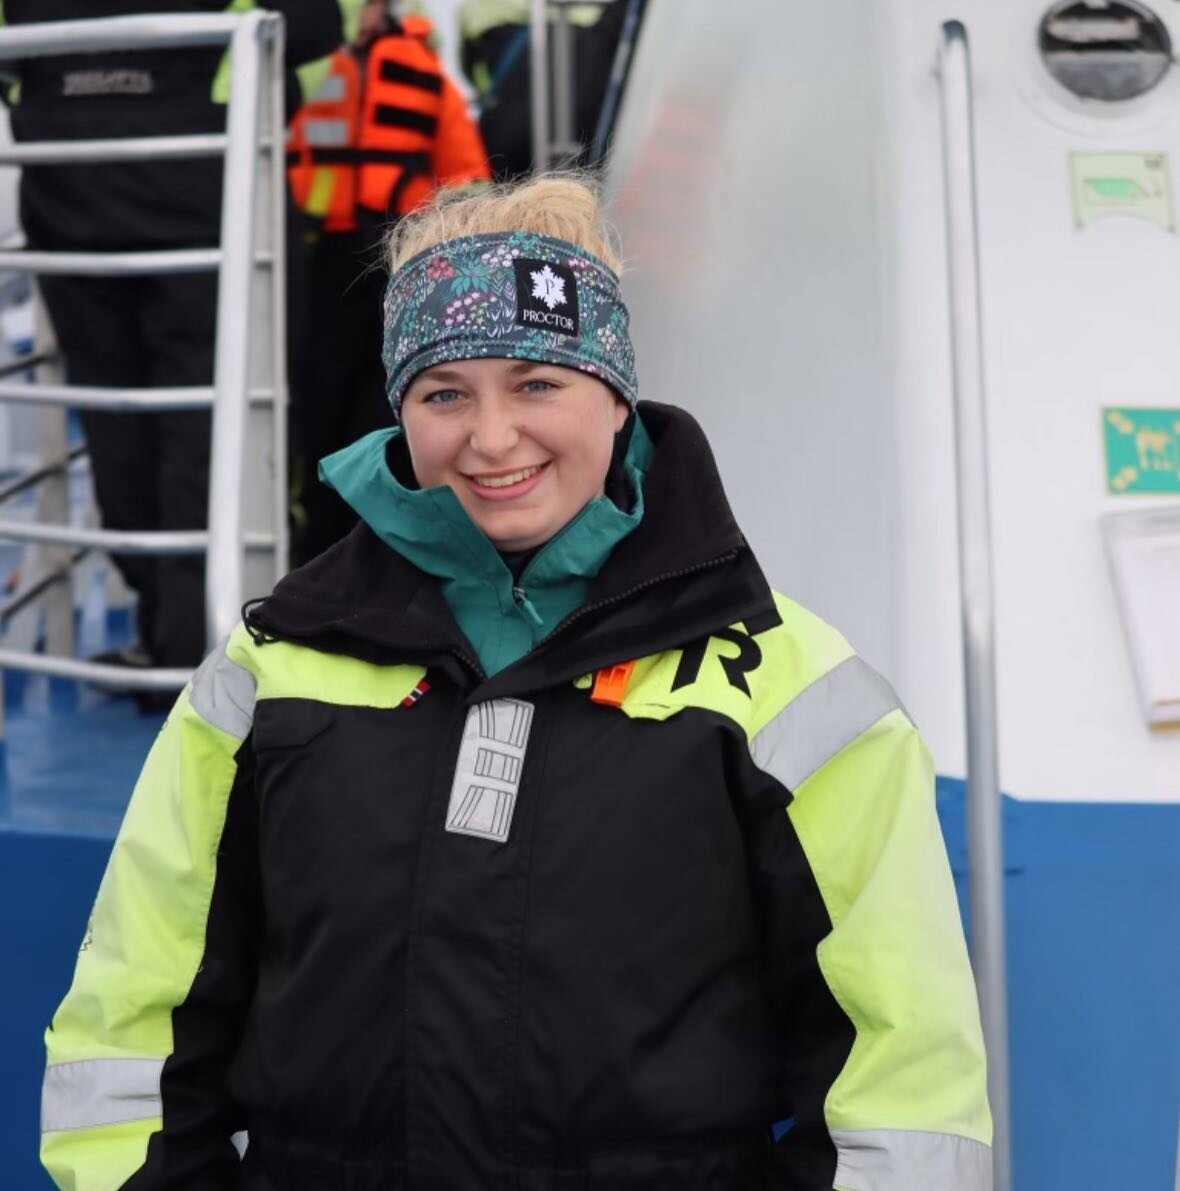 What is VTR doing this summer?

While on a trip to Iceland, coxswain Sophie Lyras &lsquo;25, was reminded of Vermont Rowing when wearing a survival suit just like the ones shes used to wearing in the boat!